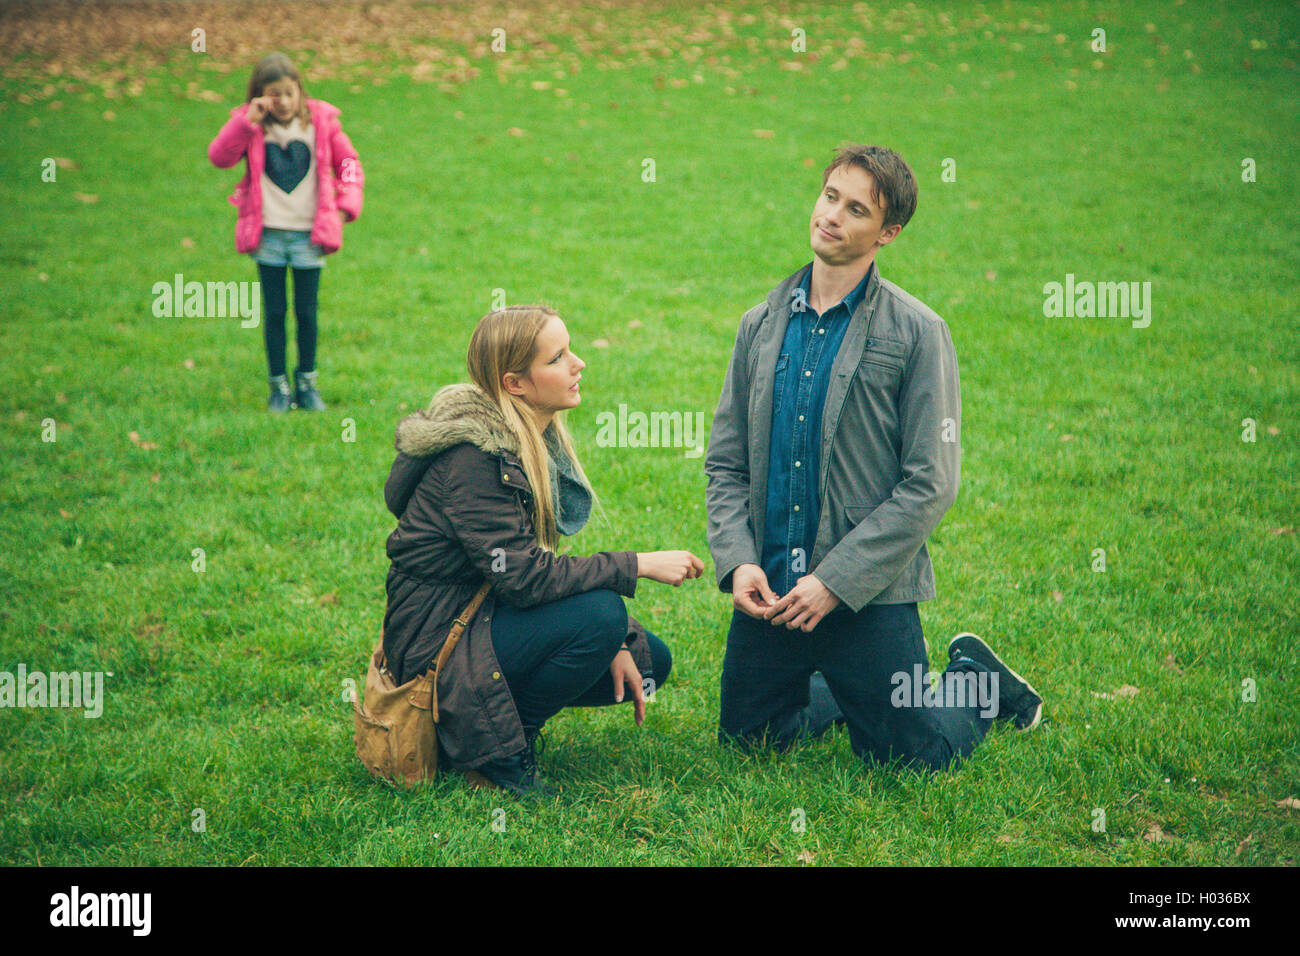 Family of three in park. Daughter cries close by to worried parents. Stock Photo